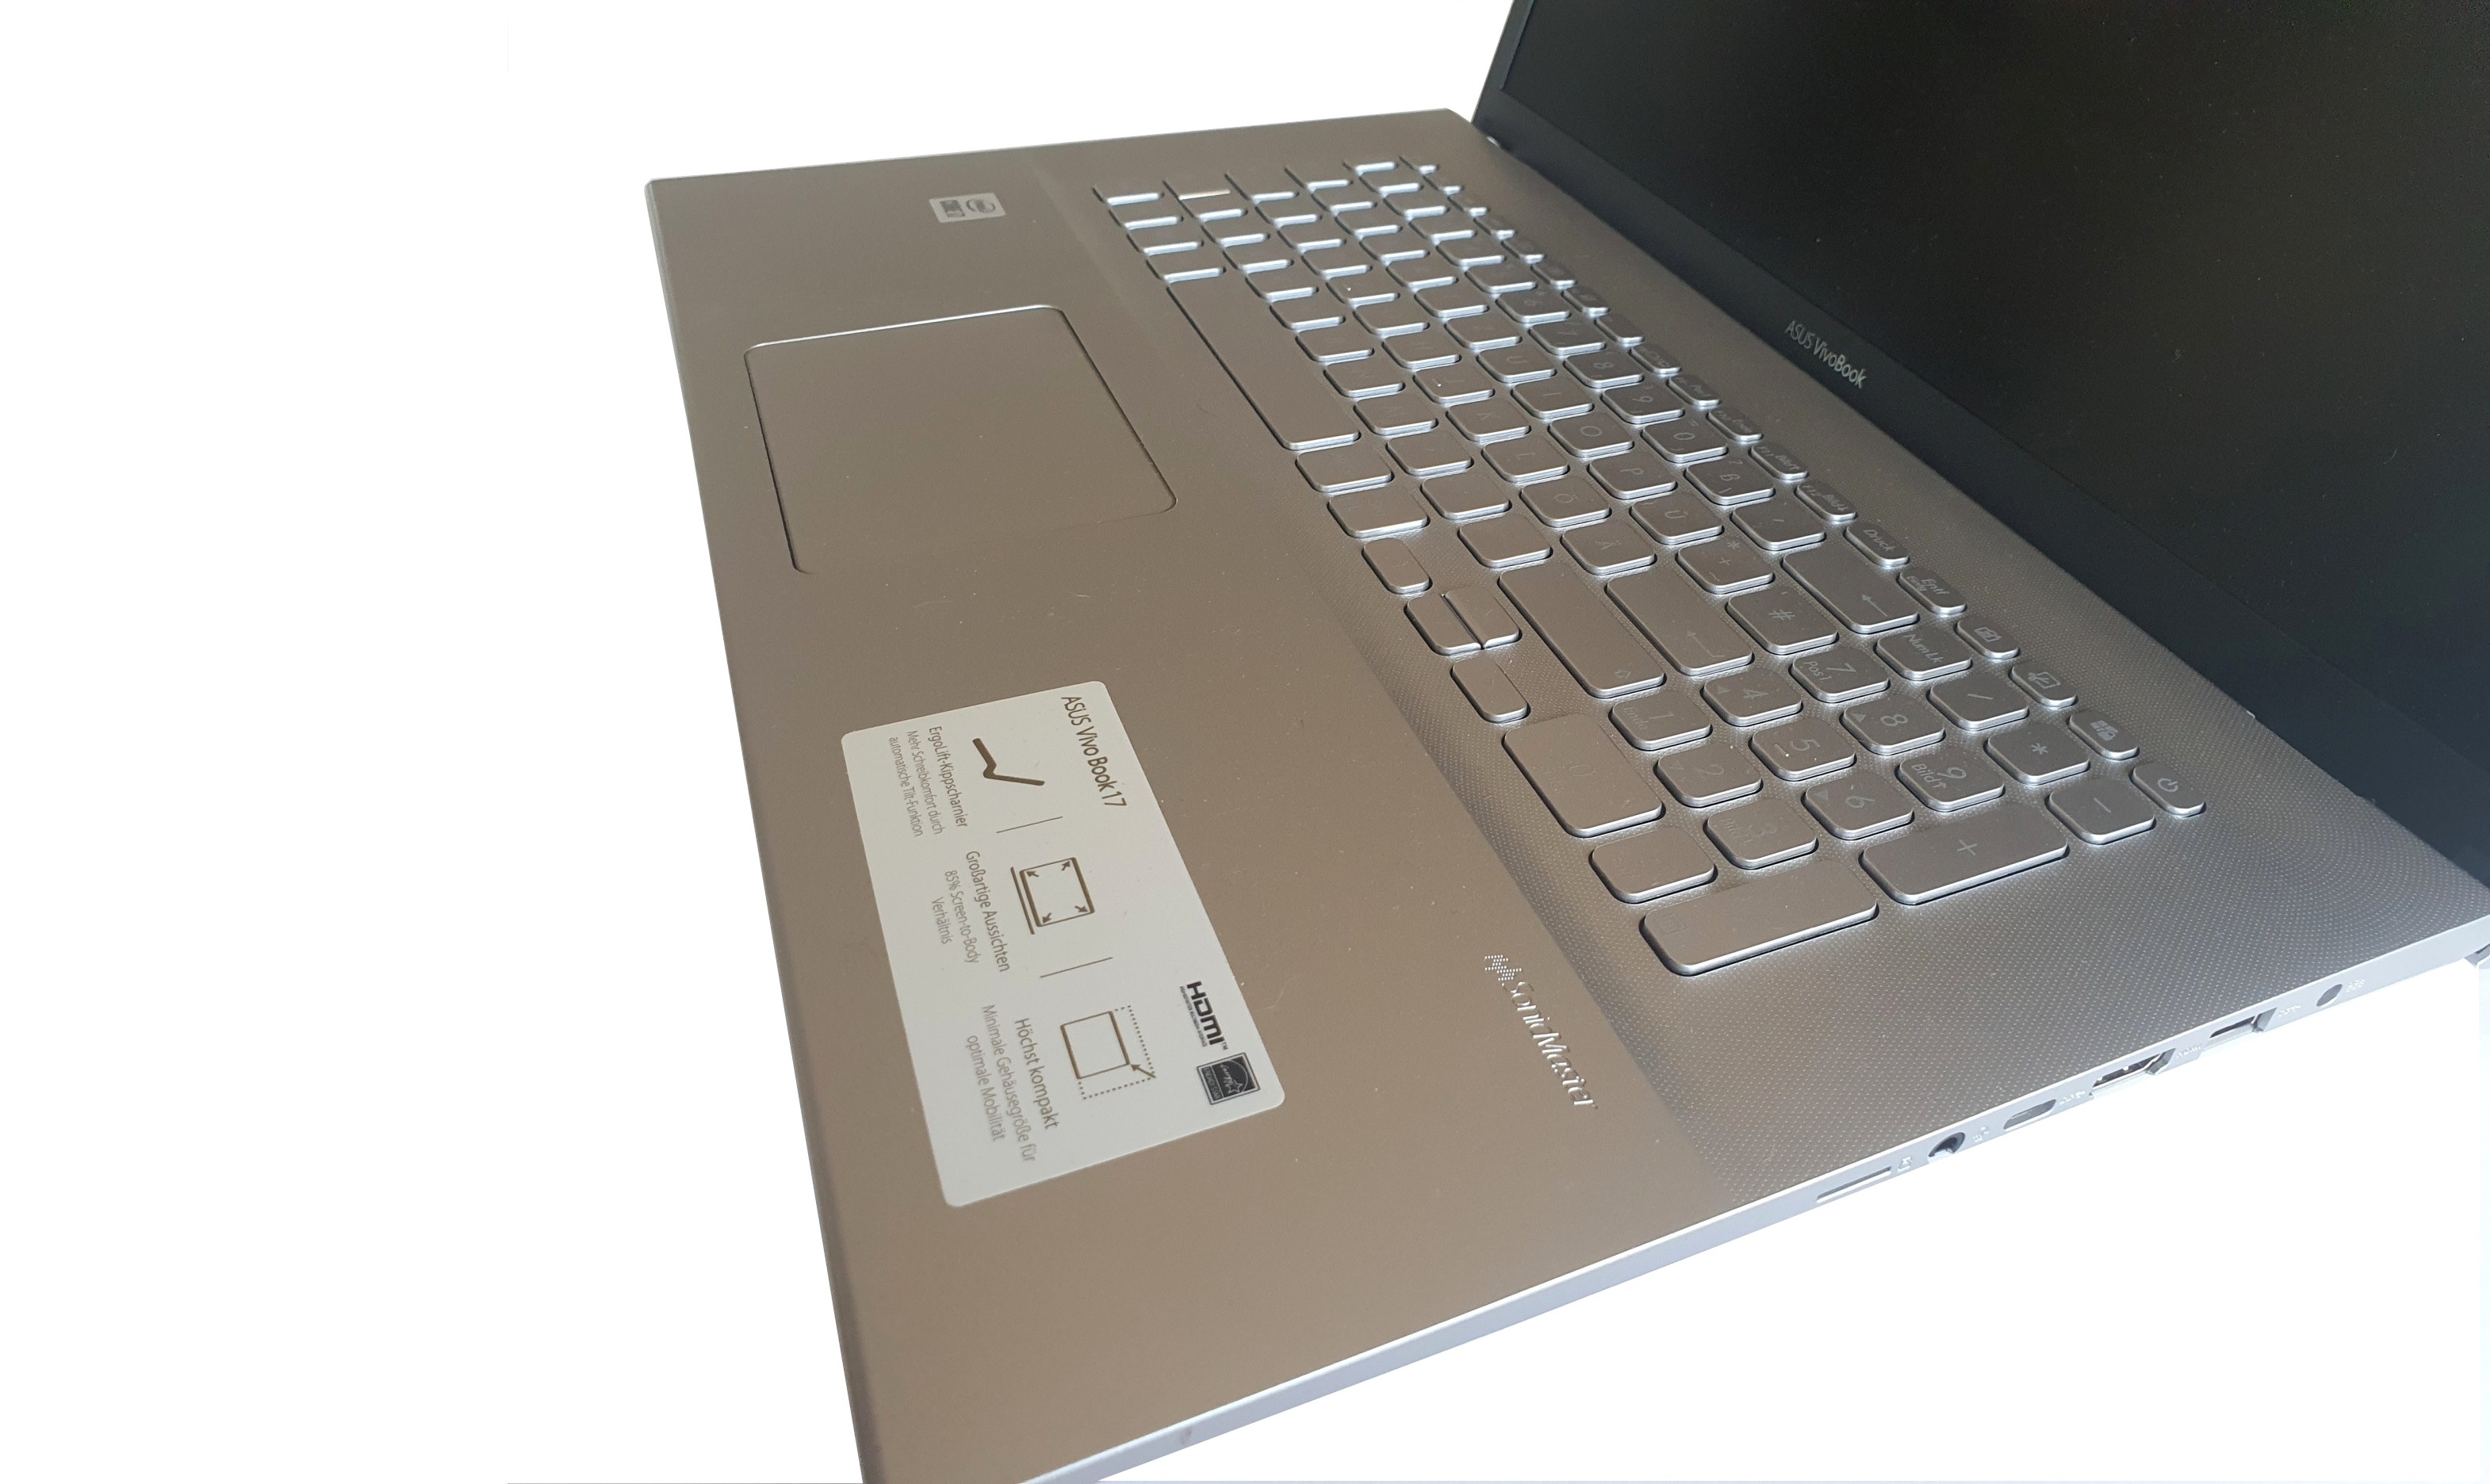 Asus VivoBook 17 (F712JA) review: Affordable 17-inch laptop with passive  cooling -  Reviews